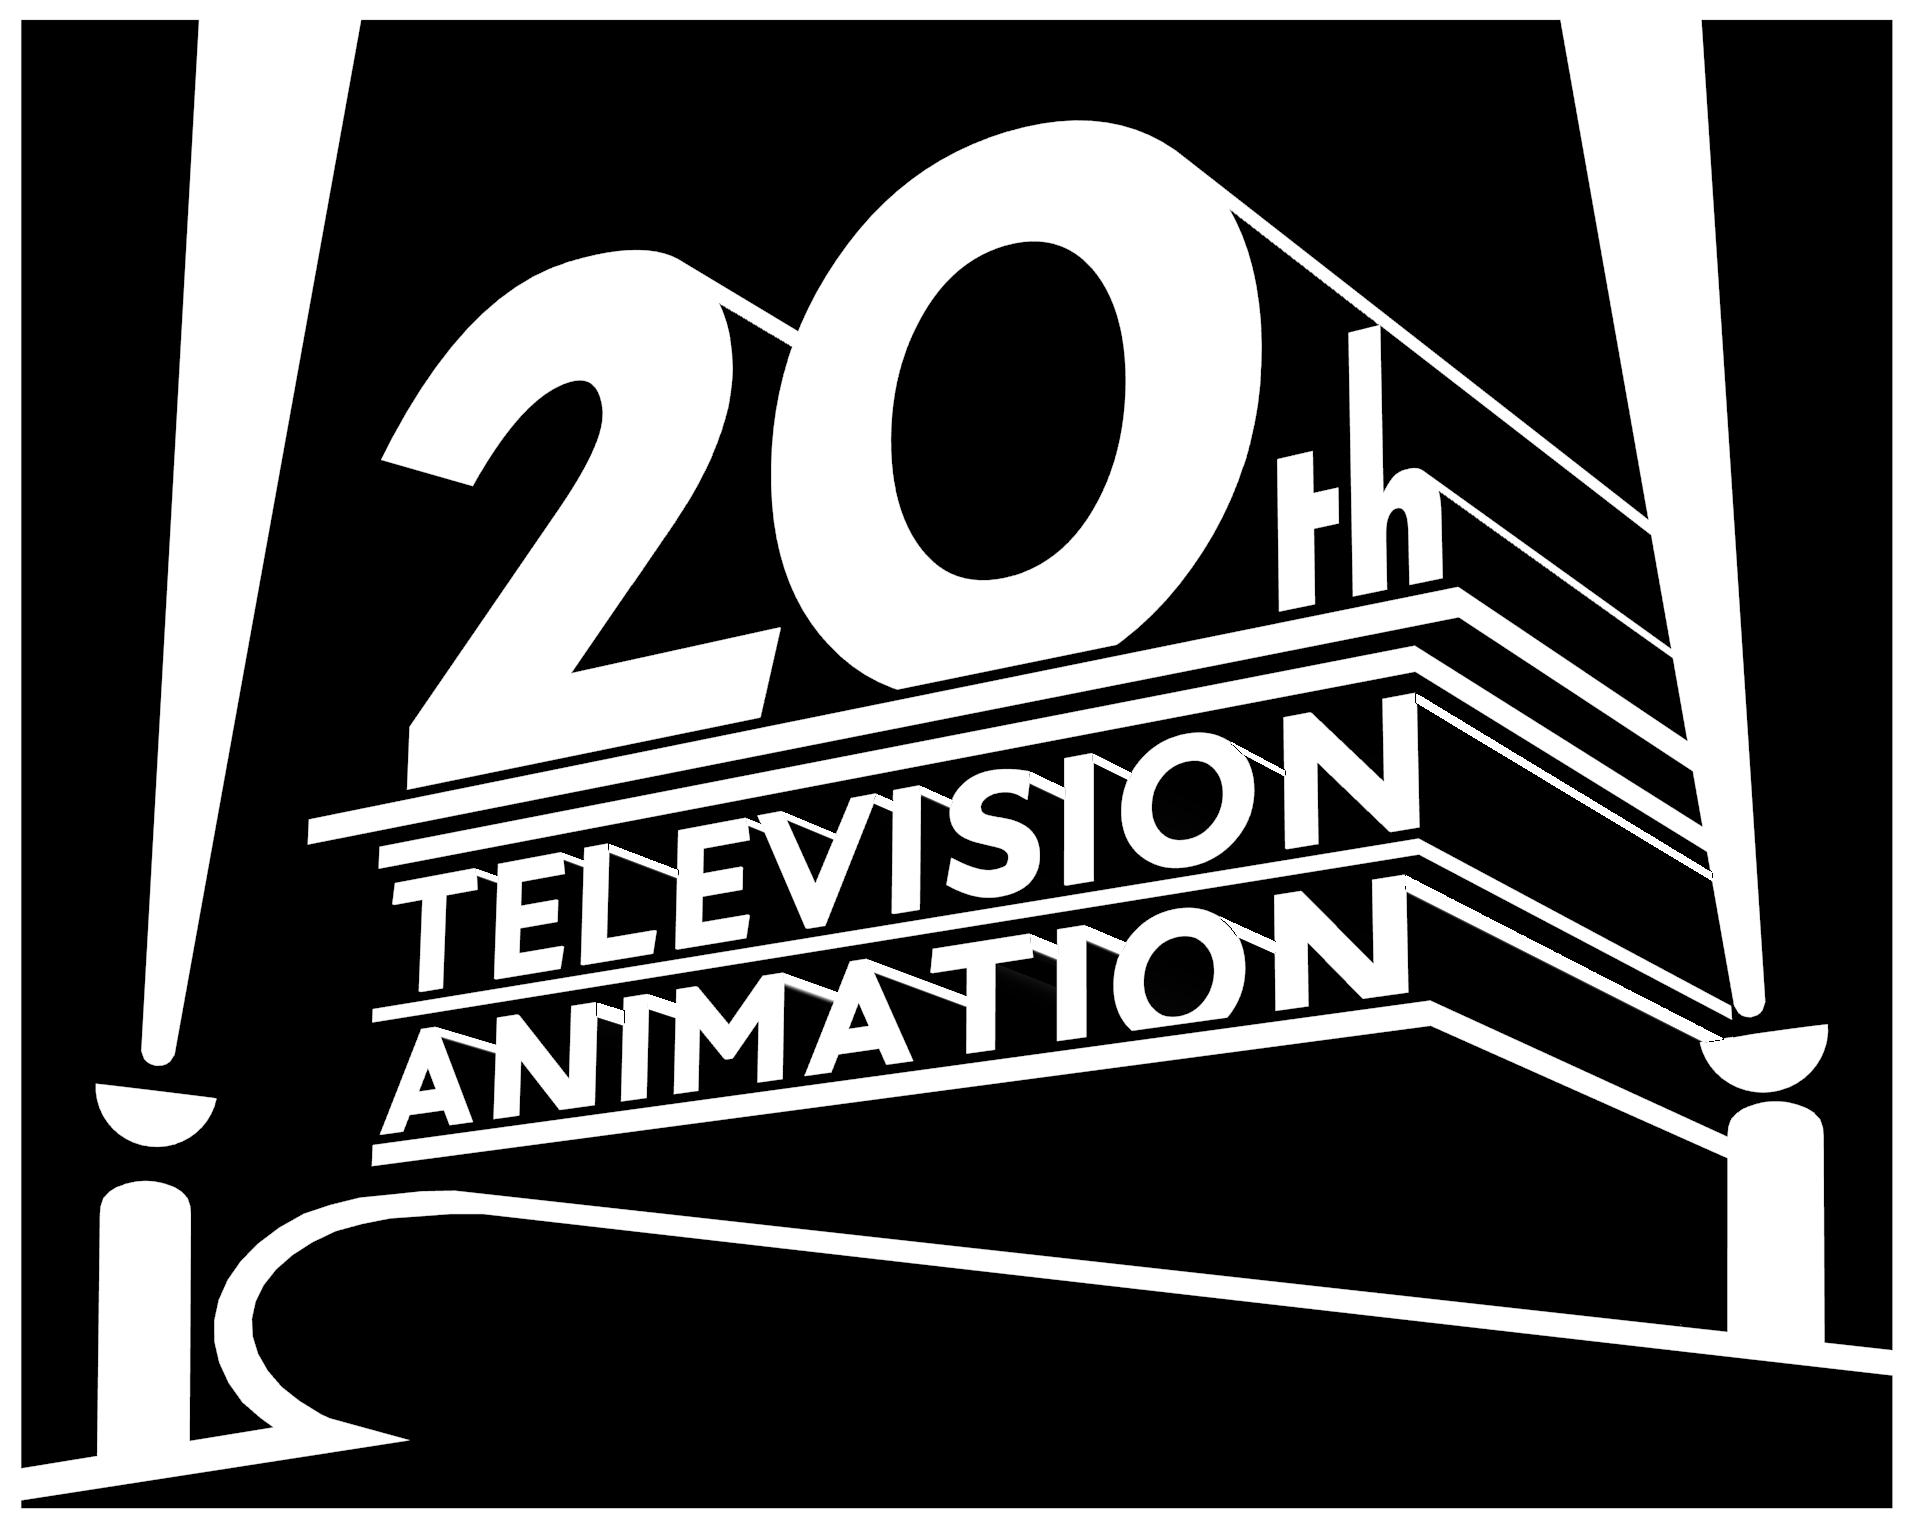 20th Television Logo PNG Transparent & SVG Vector - Freebie Supply